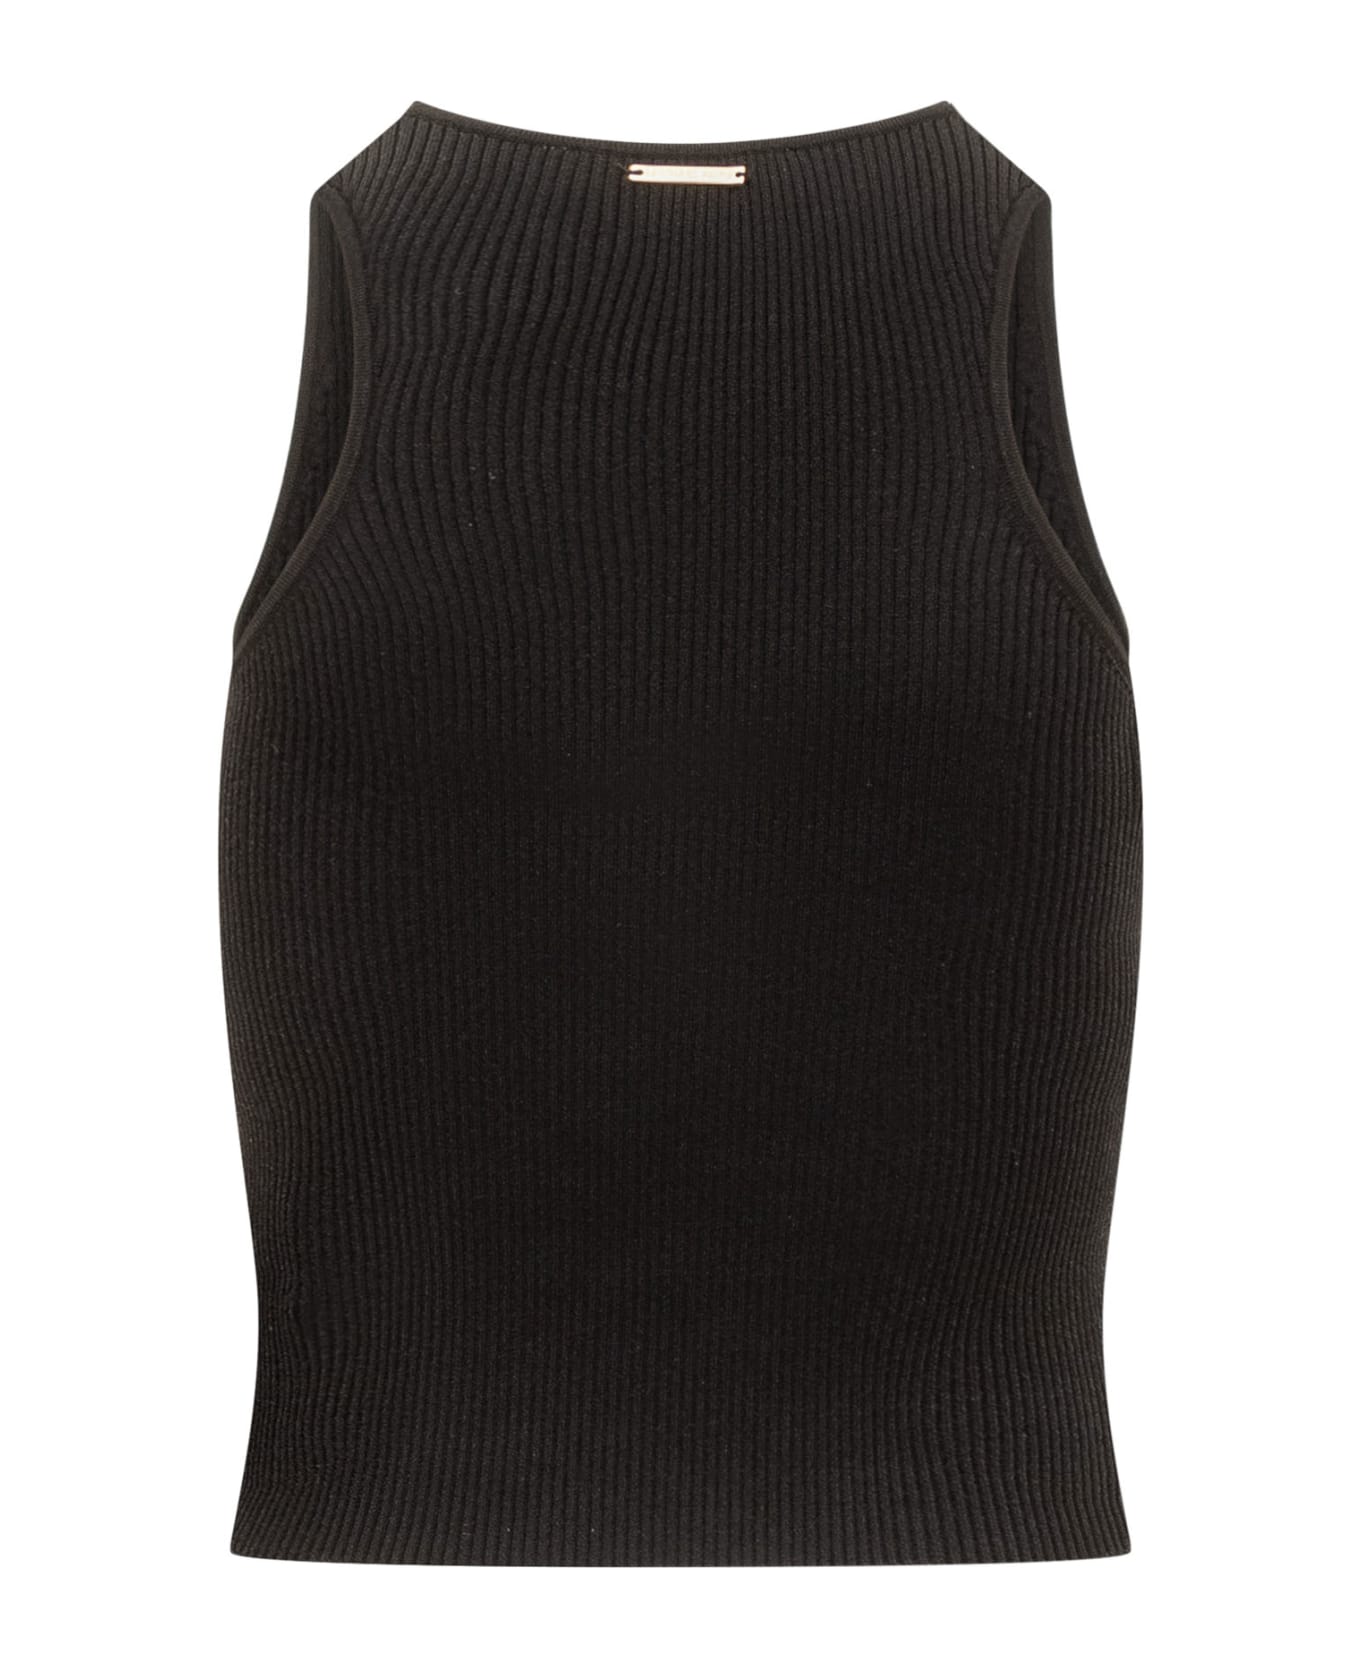 tiger patch cotton hoodie Sleeveless Top - BLACK